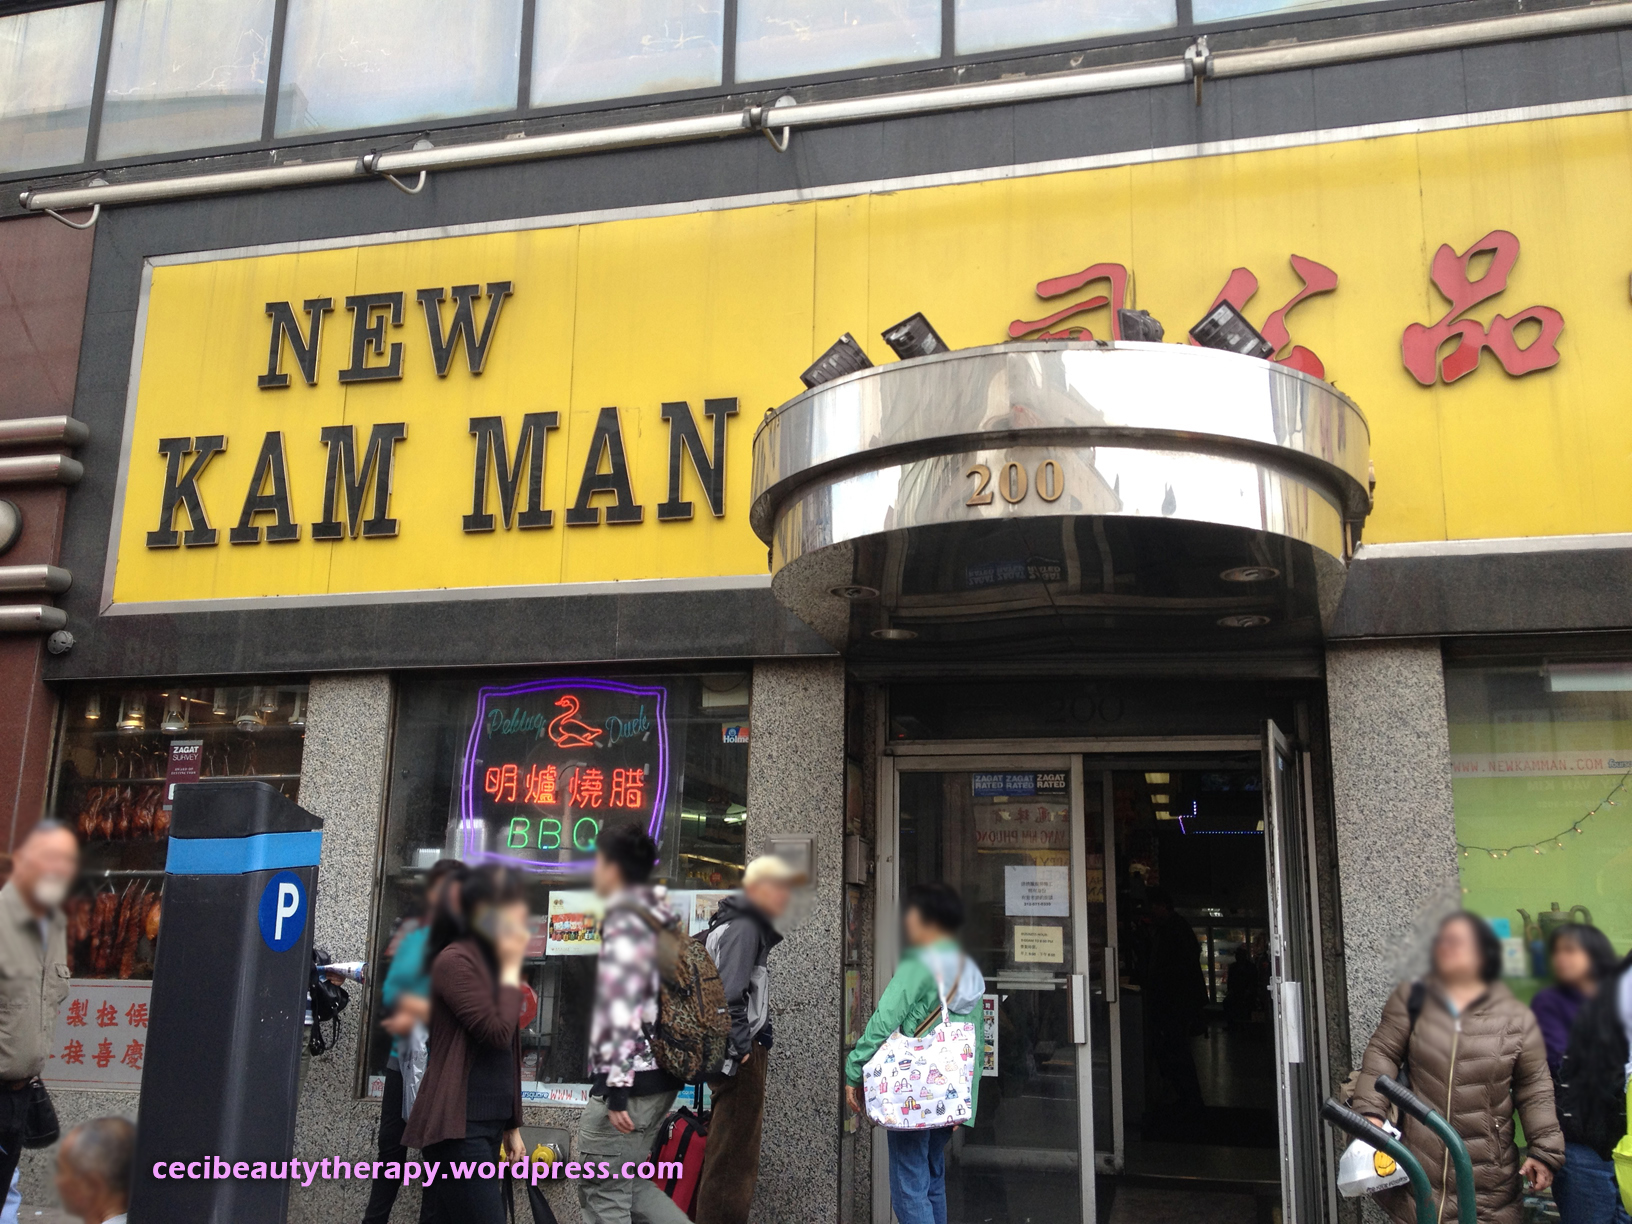 Store Visit & Over 100 Photos: New Kam Man NYC Chinatown Supermarket/Asian Beauty HEAVEN